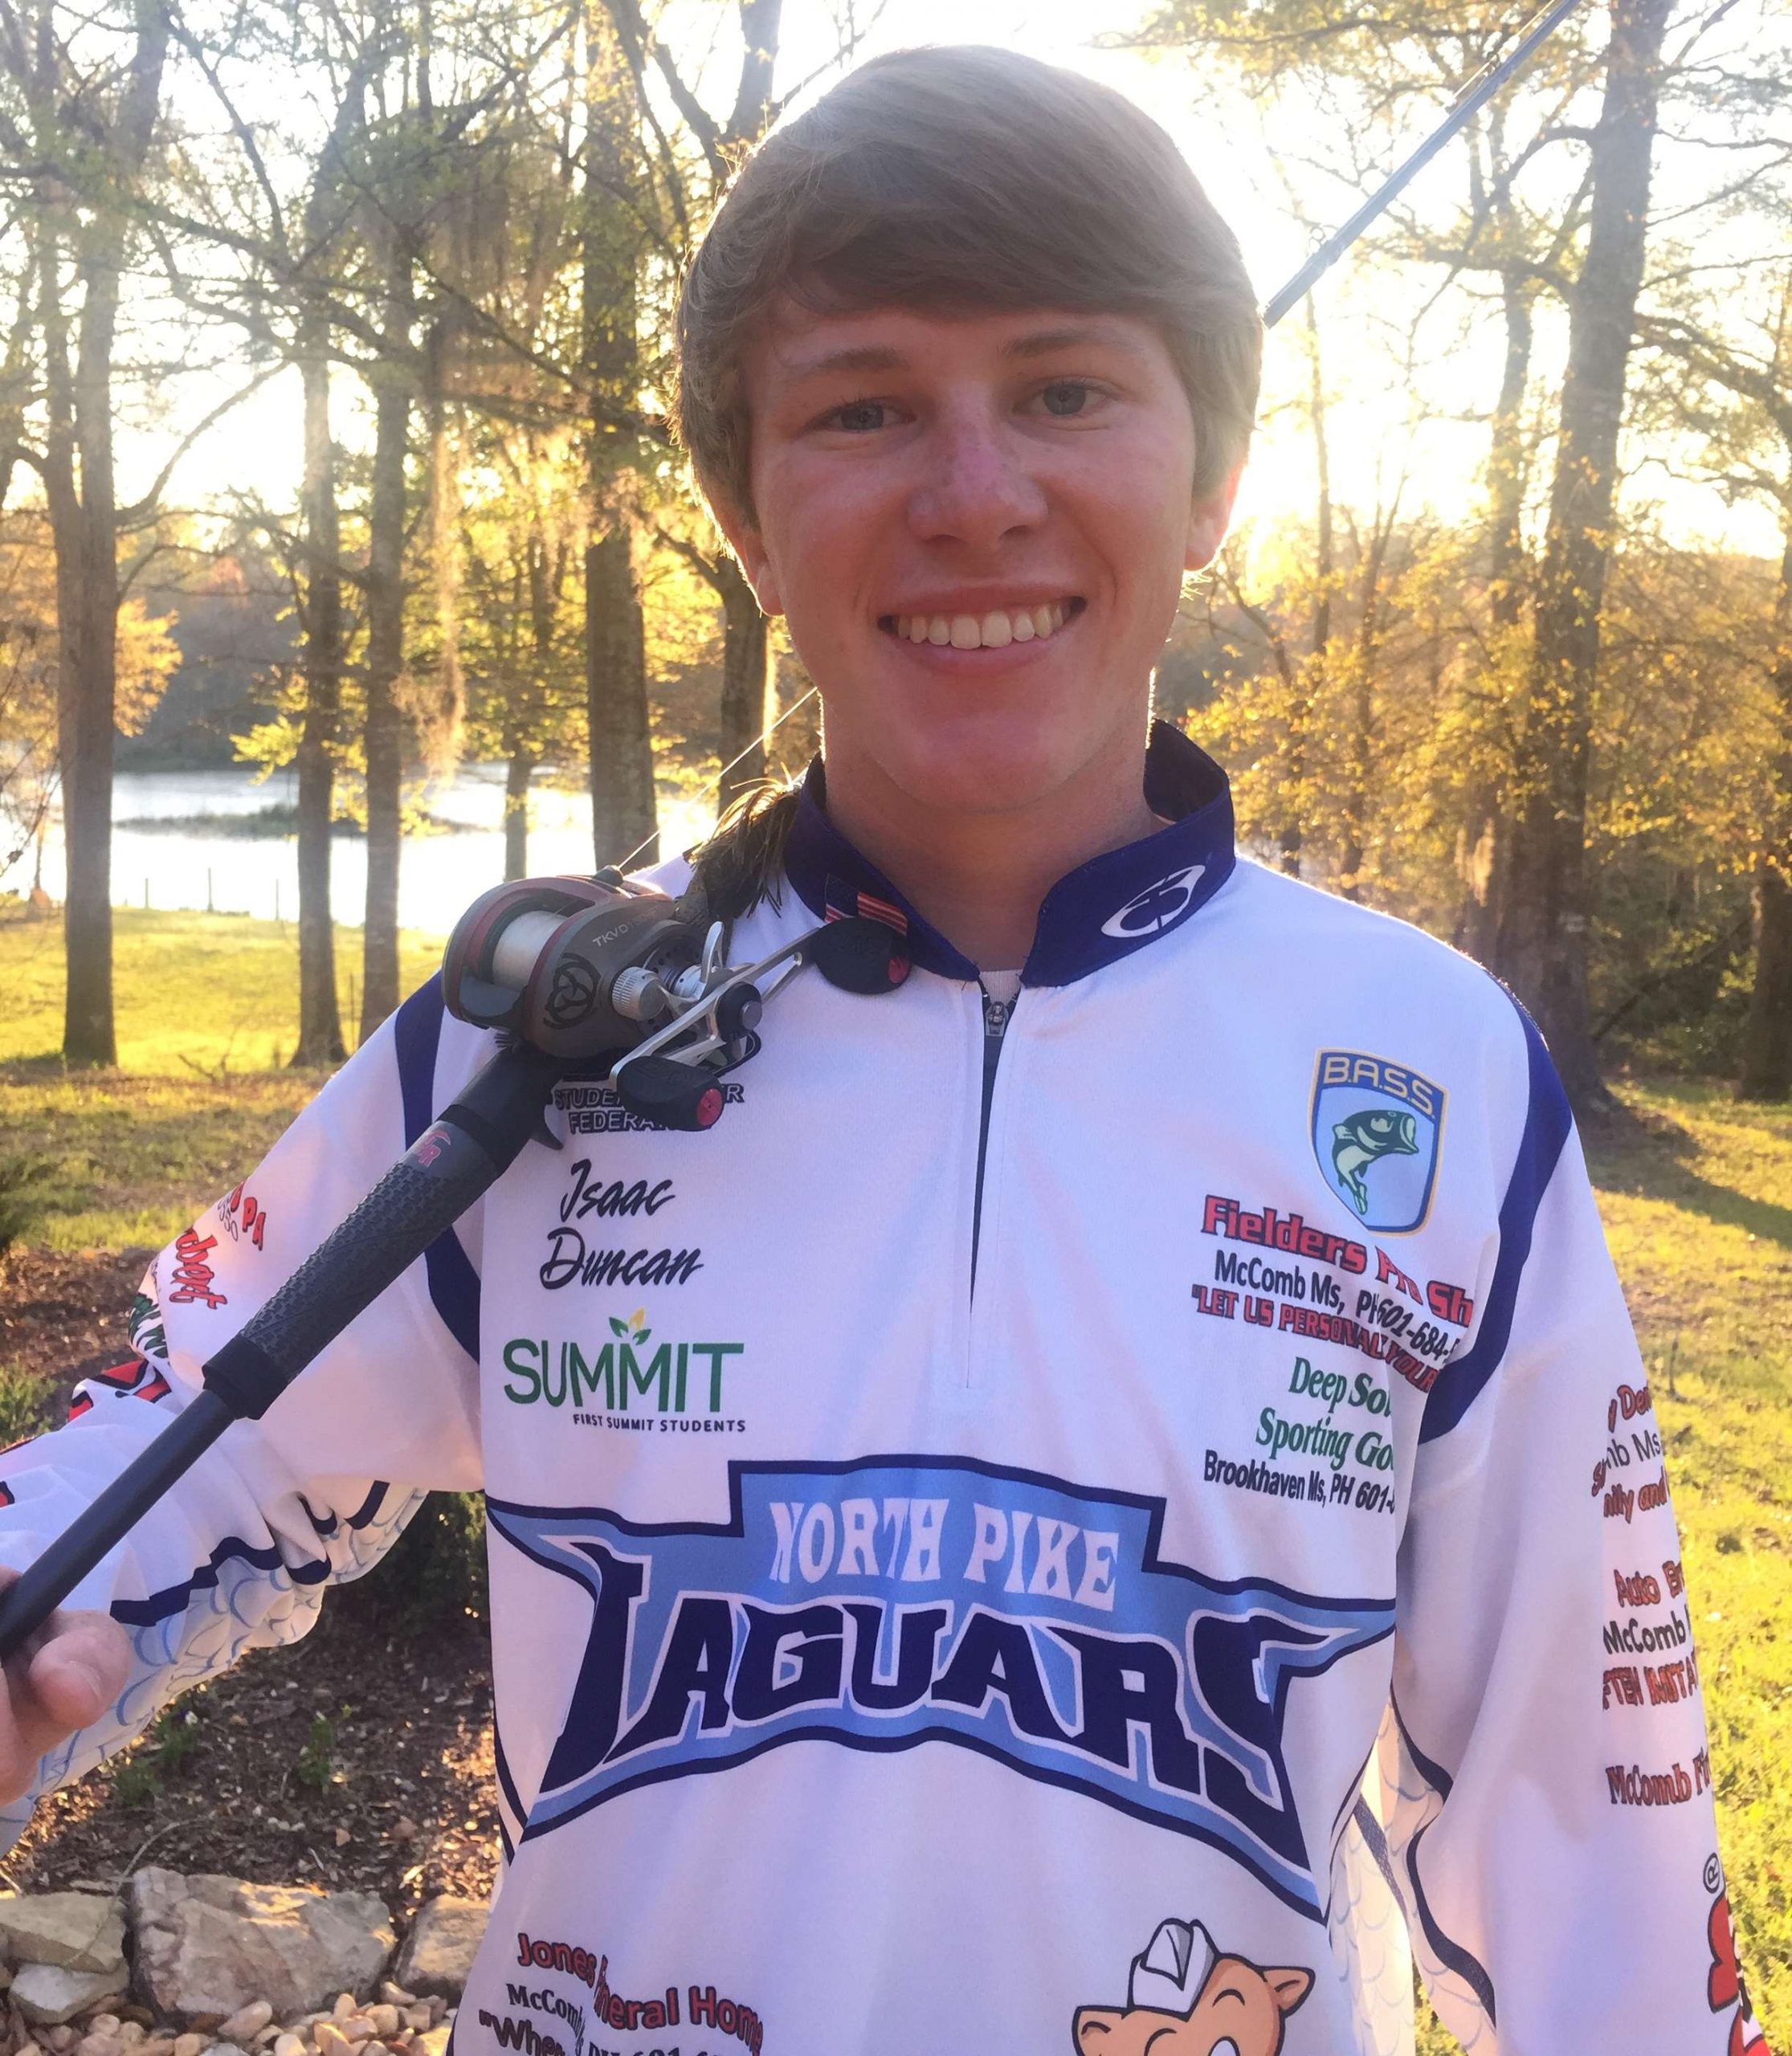 <b>Mississippi: Isaac Duncan</b><br>
Duncan of Summit, Miss., is a member of the North Pike Fishing Team. He met with the U.S. Forestry Service biologist in late 2015 and became a volunteer at Okhissa Lake. Duncan learned that the current survey (shocking) only shows shallow fish and the biologist needed more creel information. He is working to collect creel information that will help the biologist make decisions on what the lake needs to grow quality bass. 
